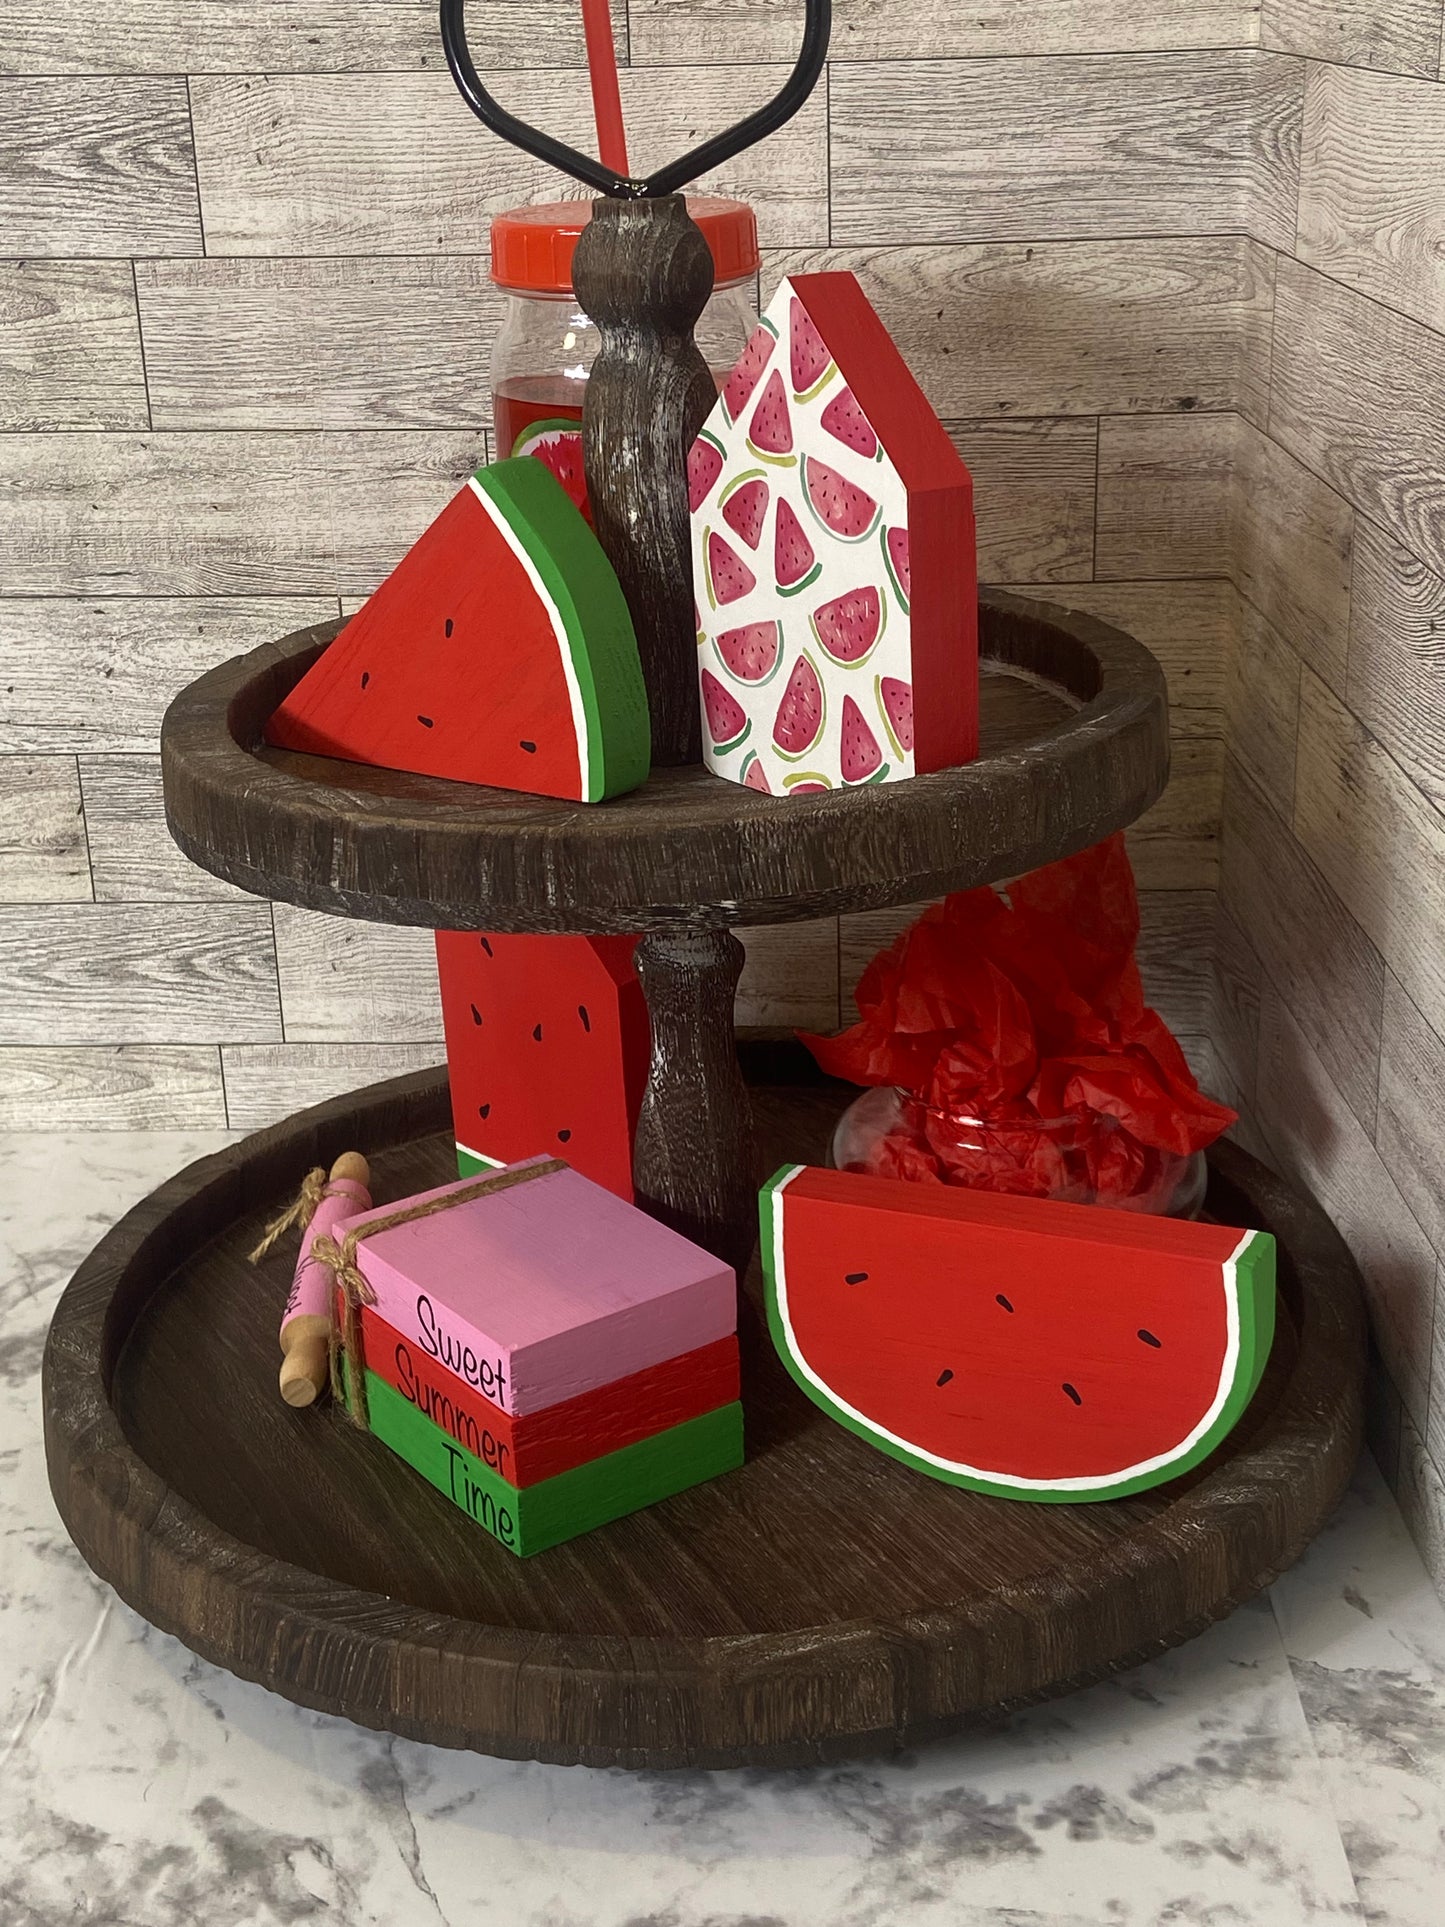 Sweet Summer Time - Medium Tiered Tray Book Stack